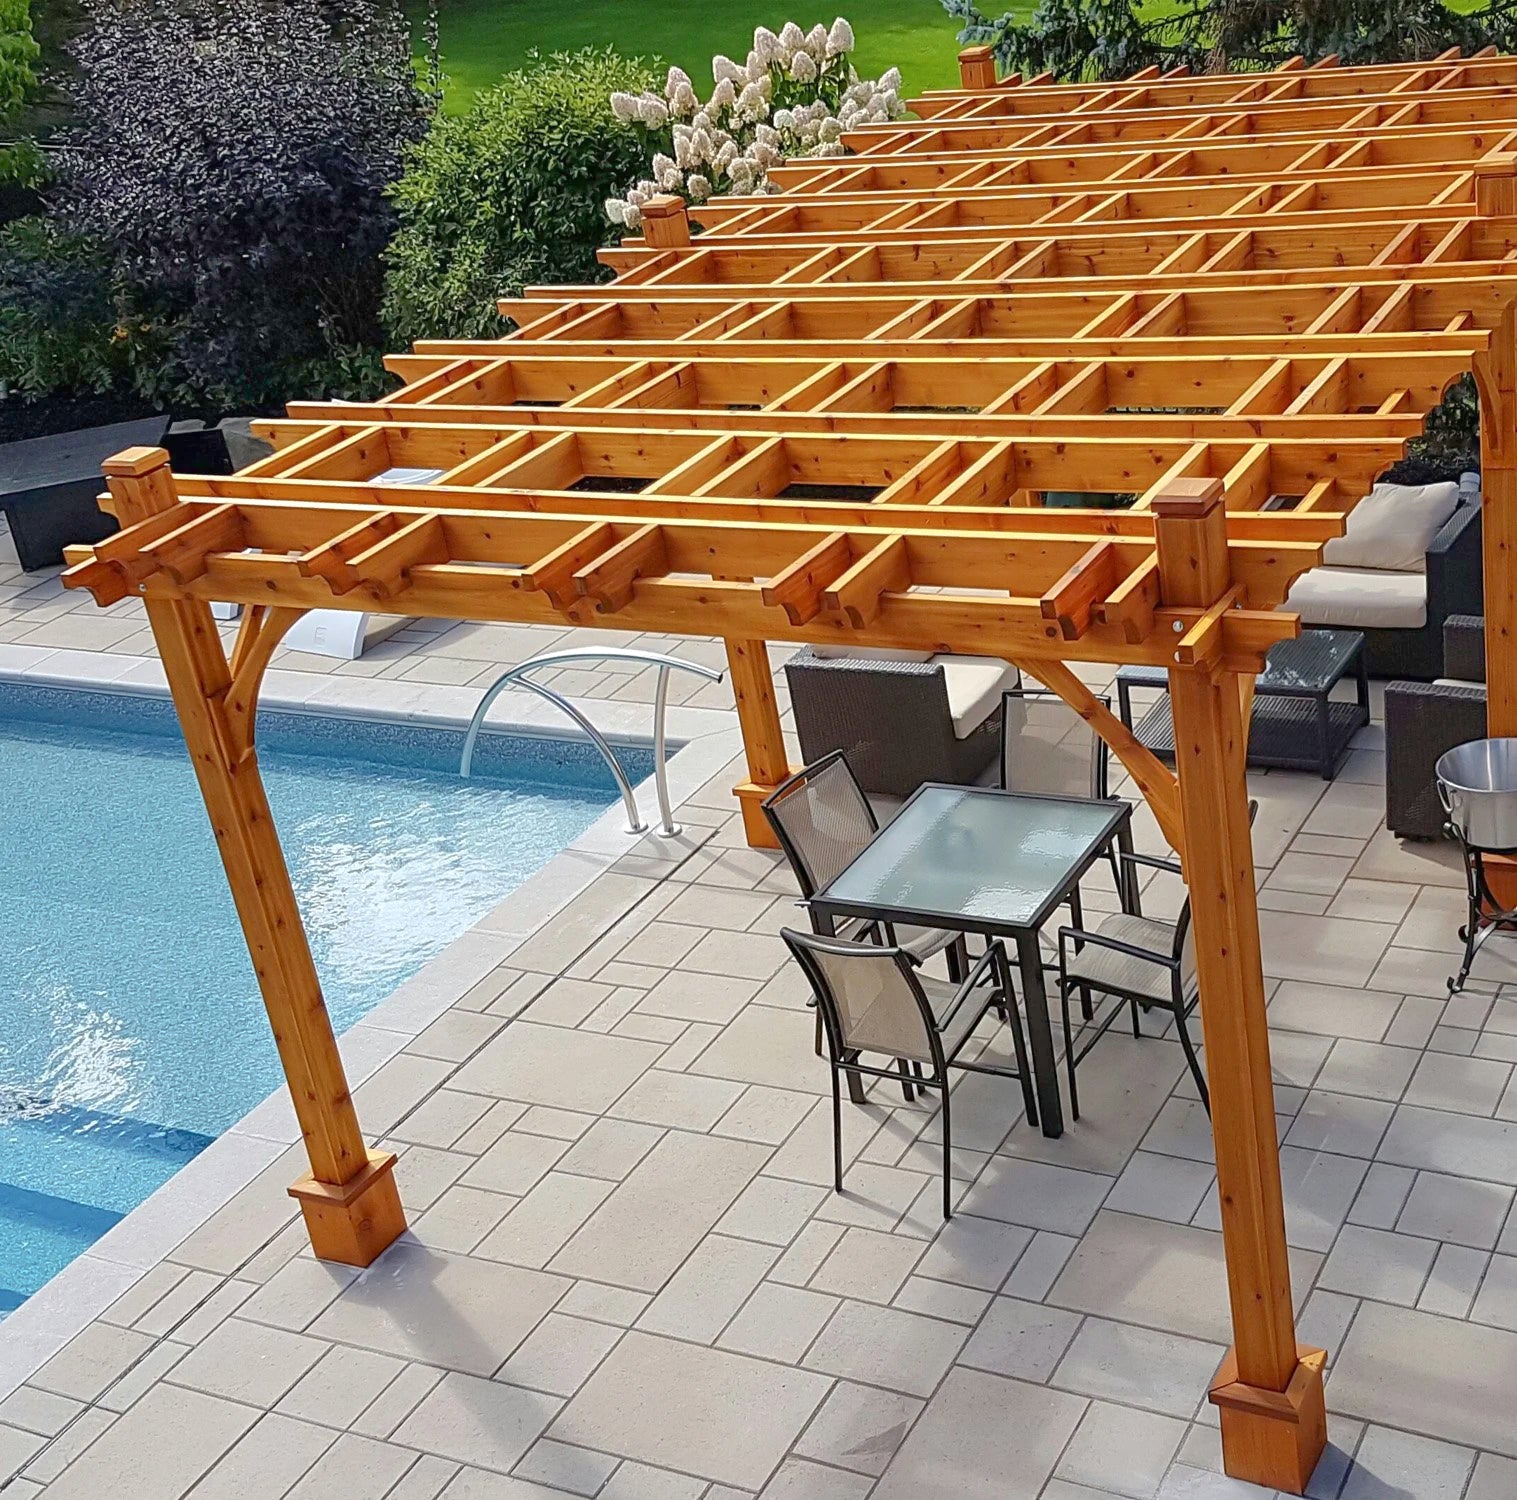 outdoor living today cedar pergola with outdoor furniture on pavers beside pool